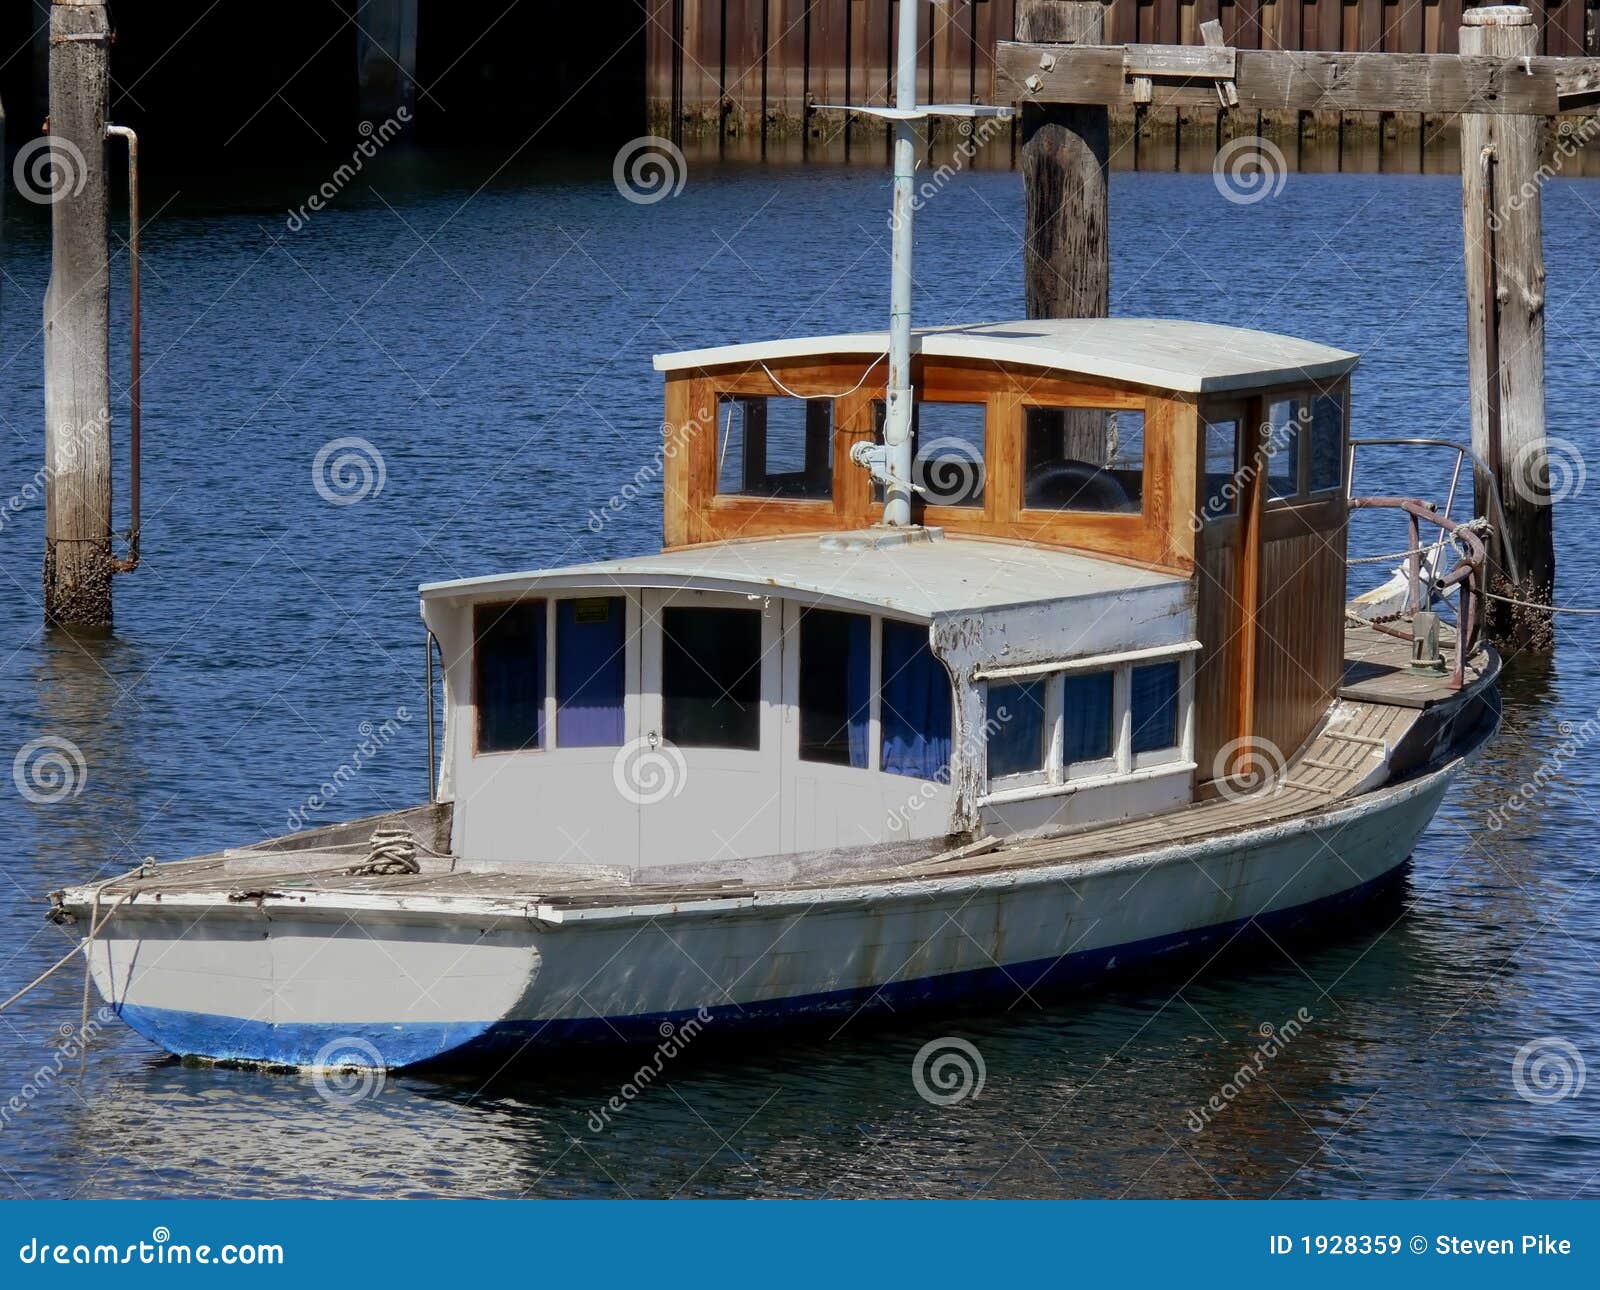 Old Wooden Boat Royalty Free Stock Images - Image: 1928359